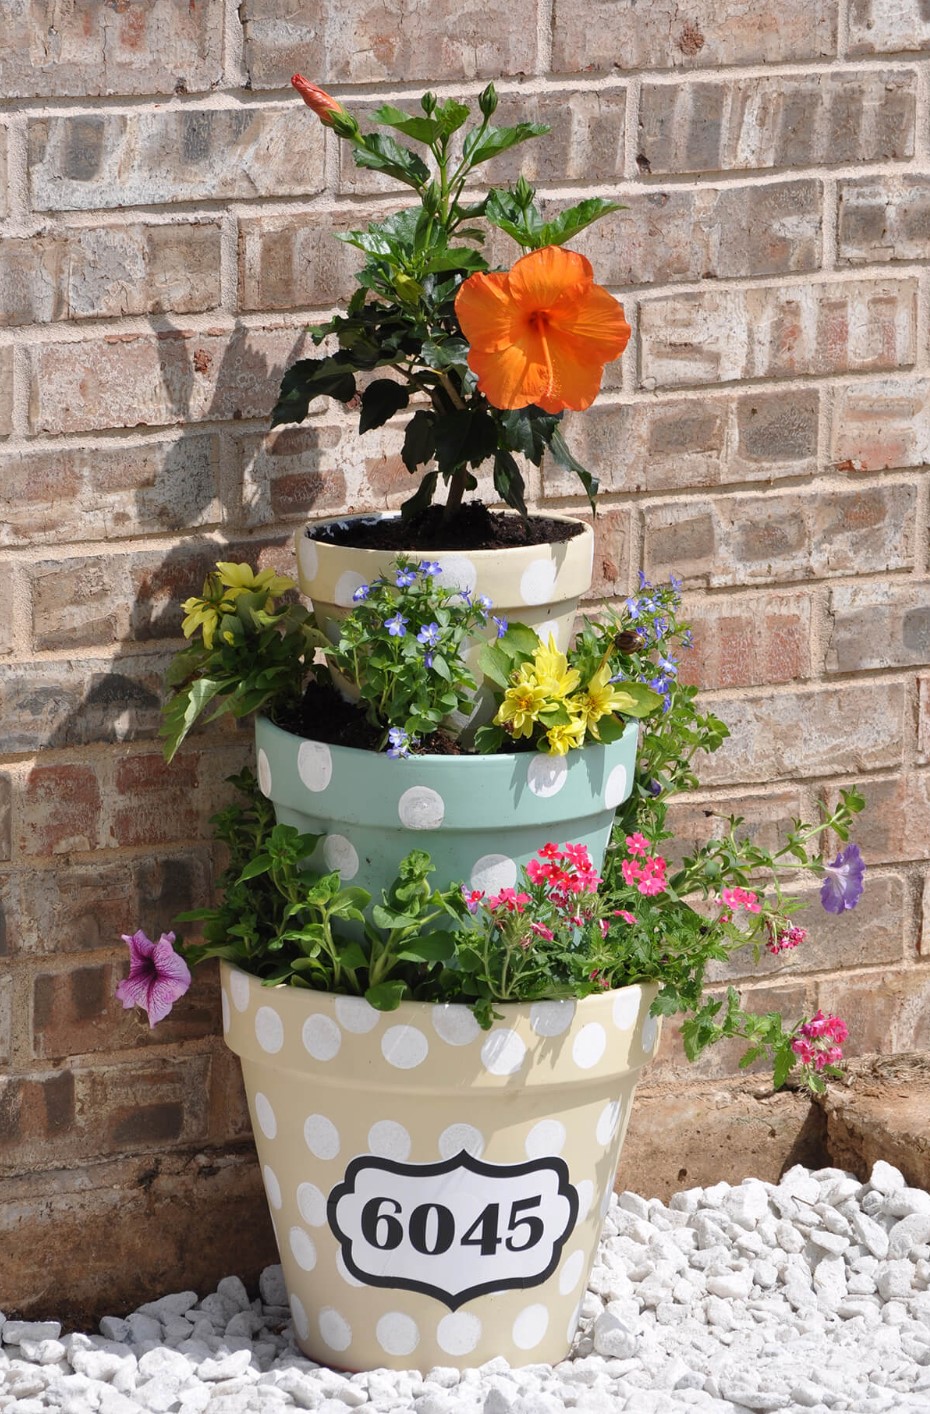 Polka-dotted tiered planters